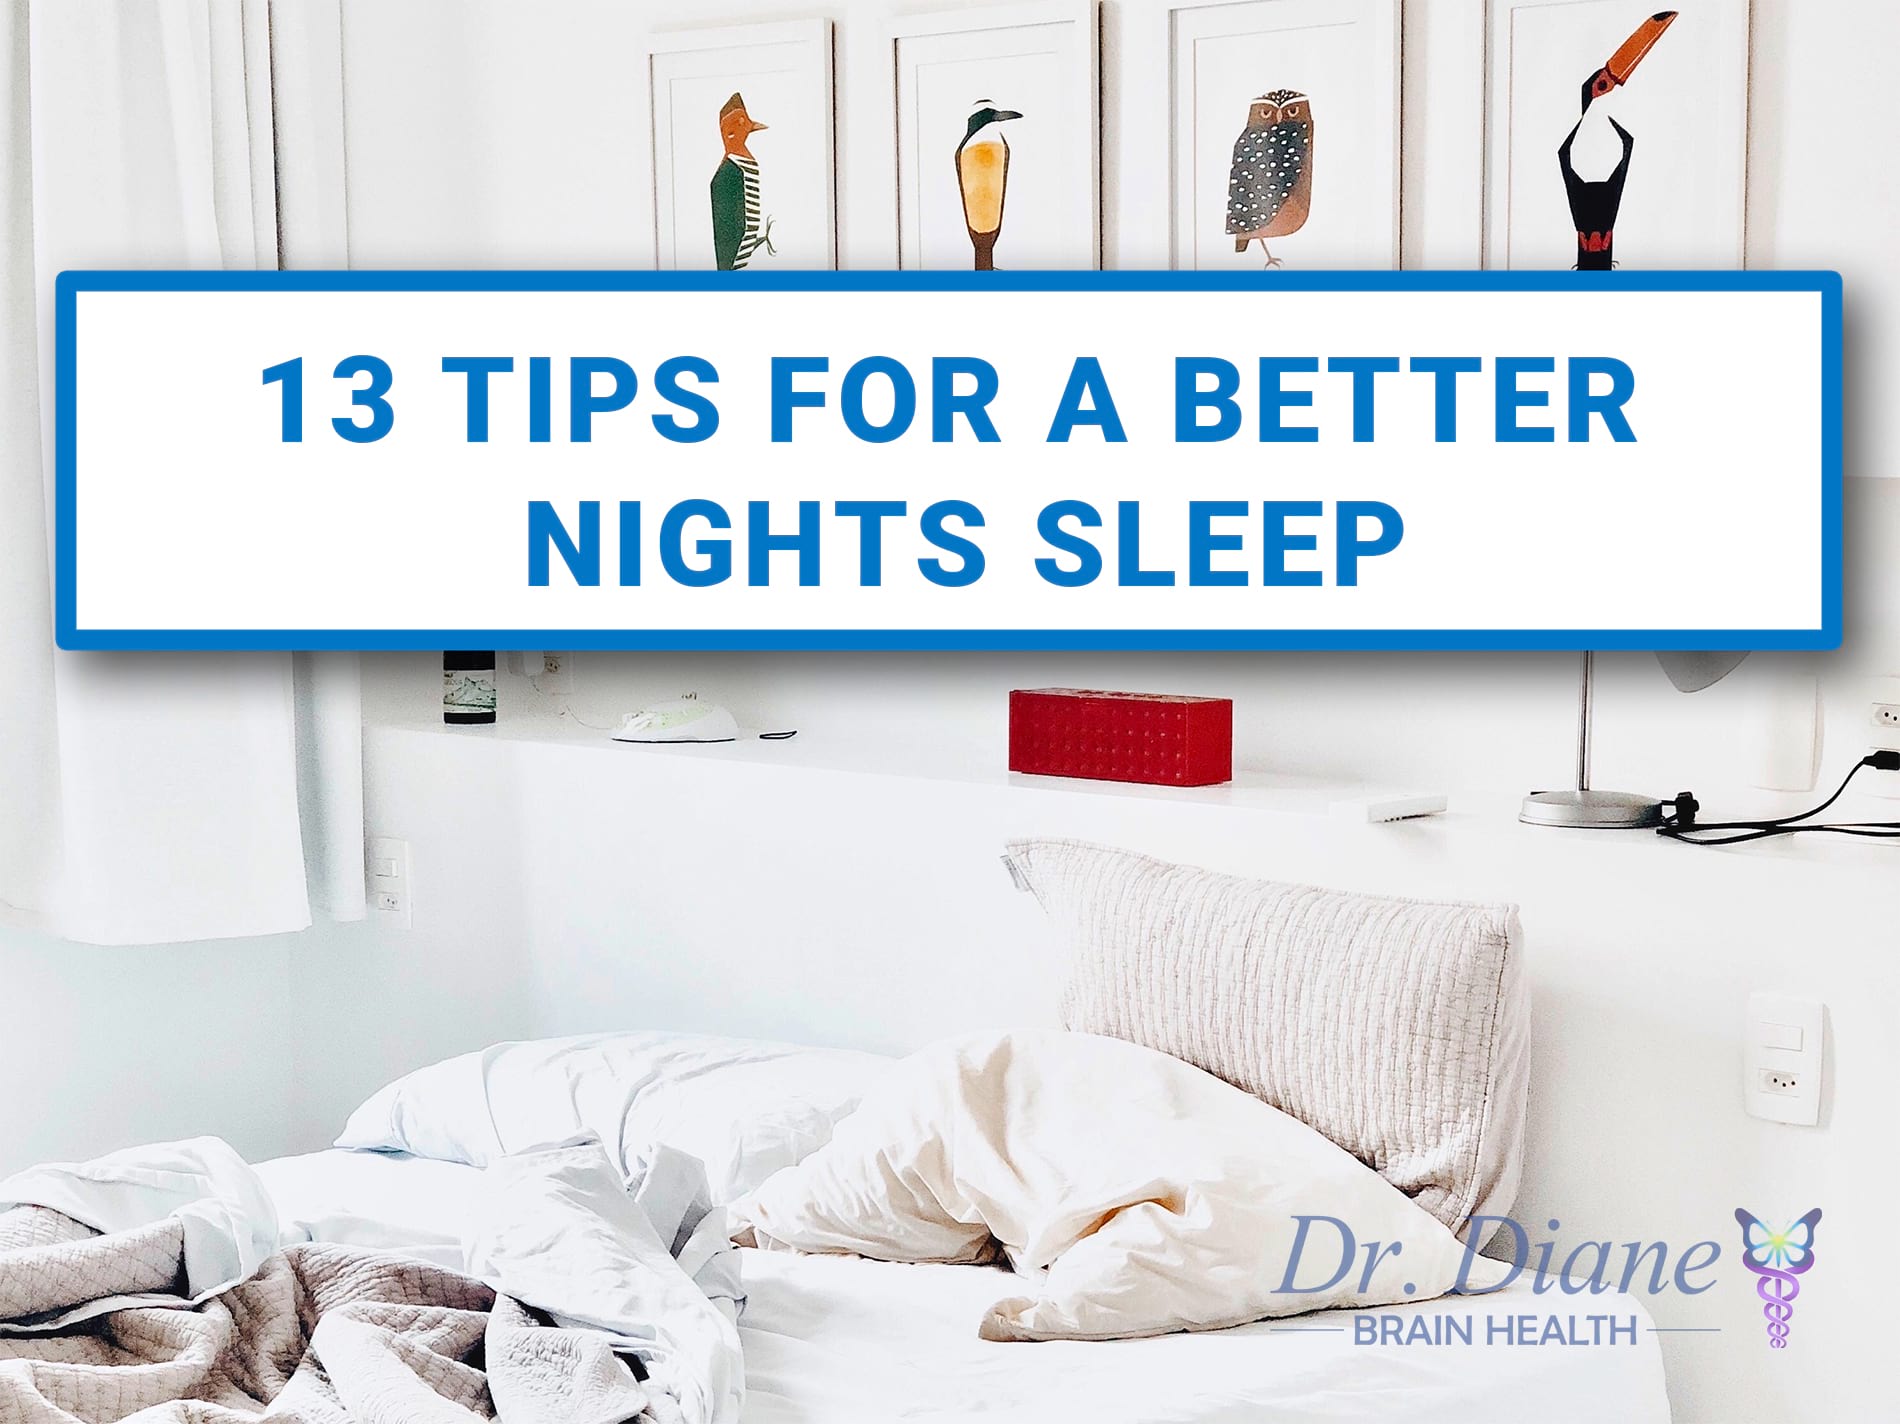 13 Tips for a Better Night’s Sleep